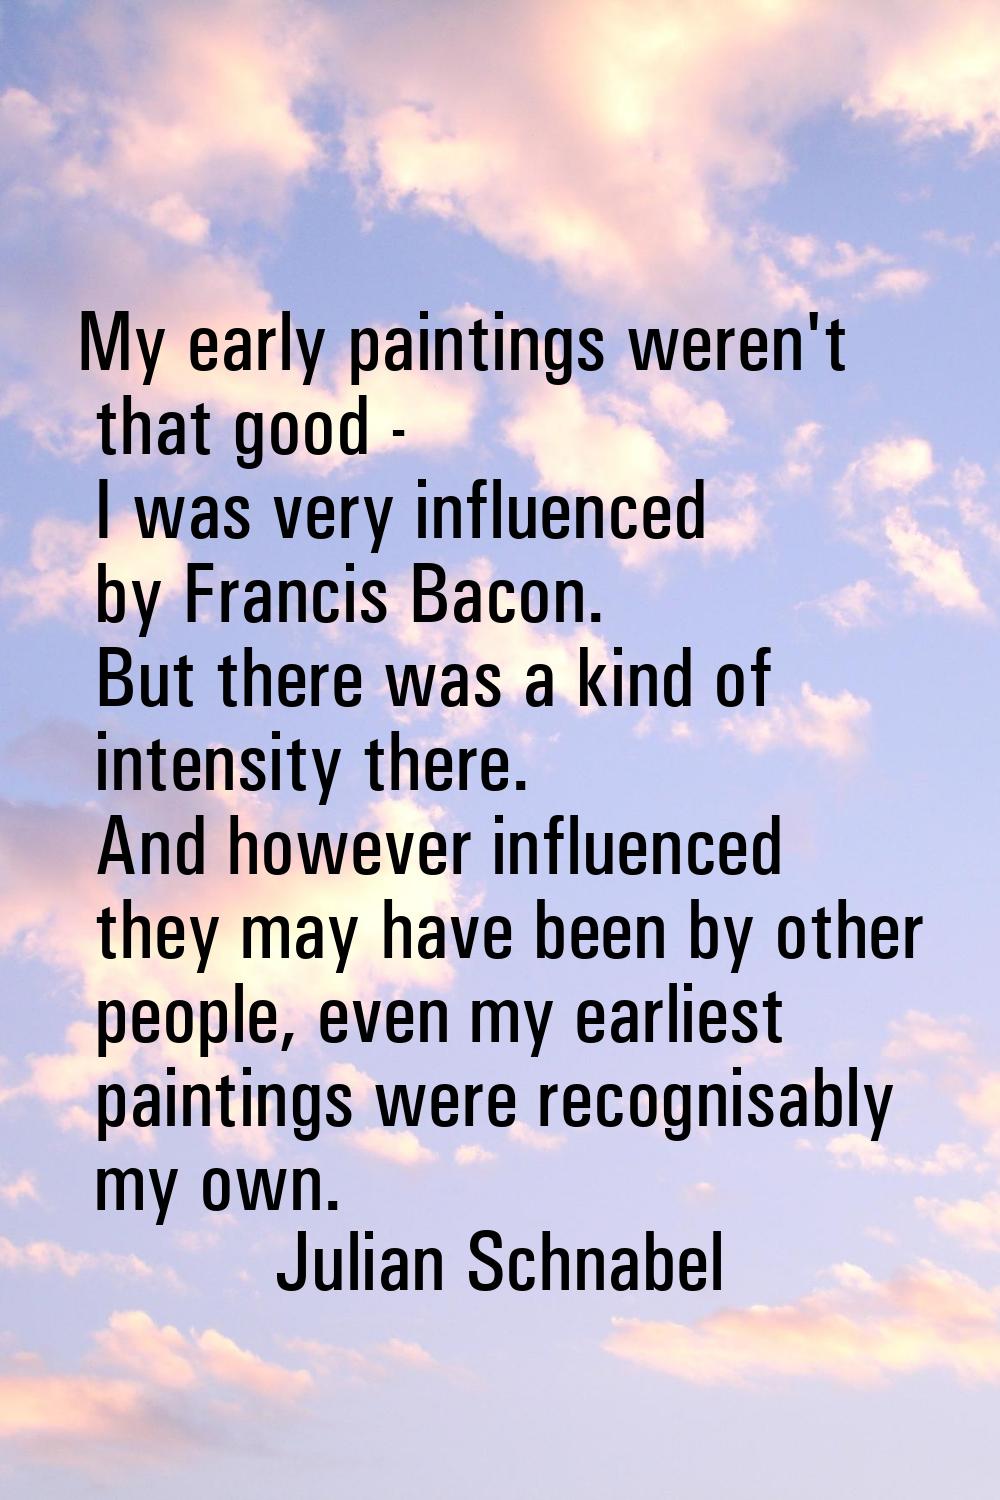 My early paintings weren't that good - I was very influenced by Francis Bacon. But there was a kind